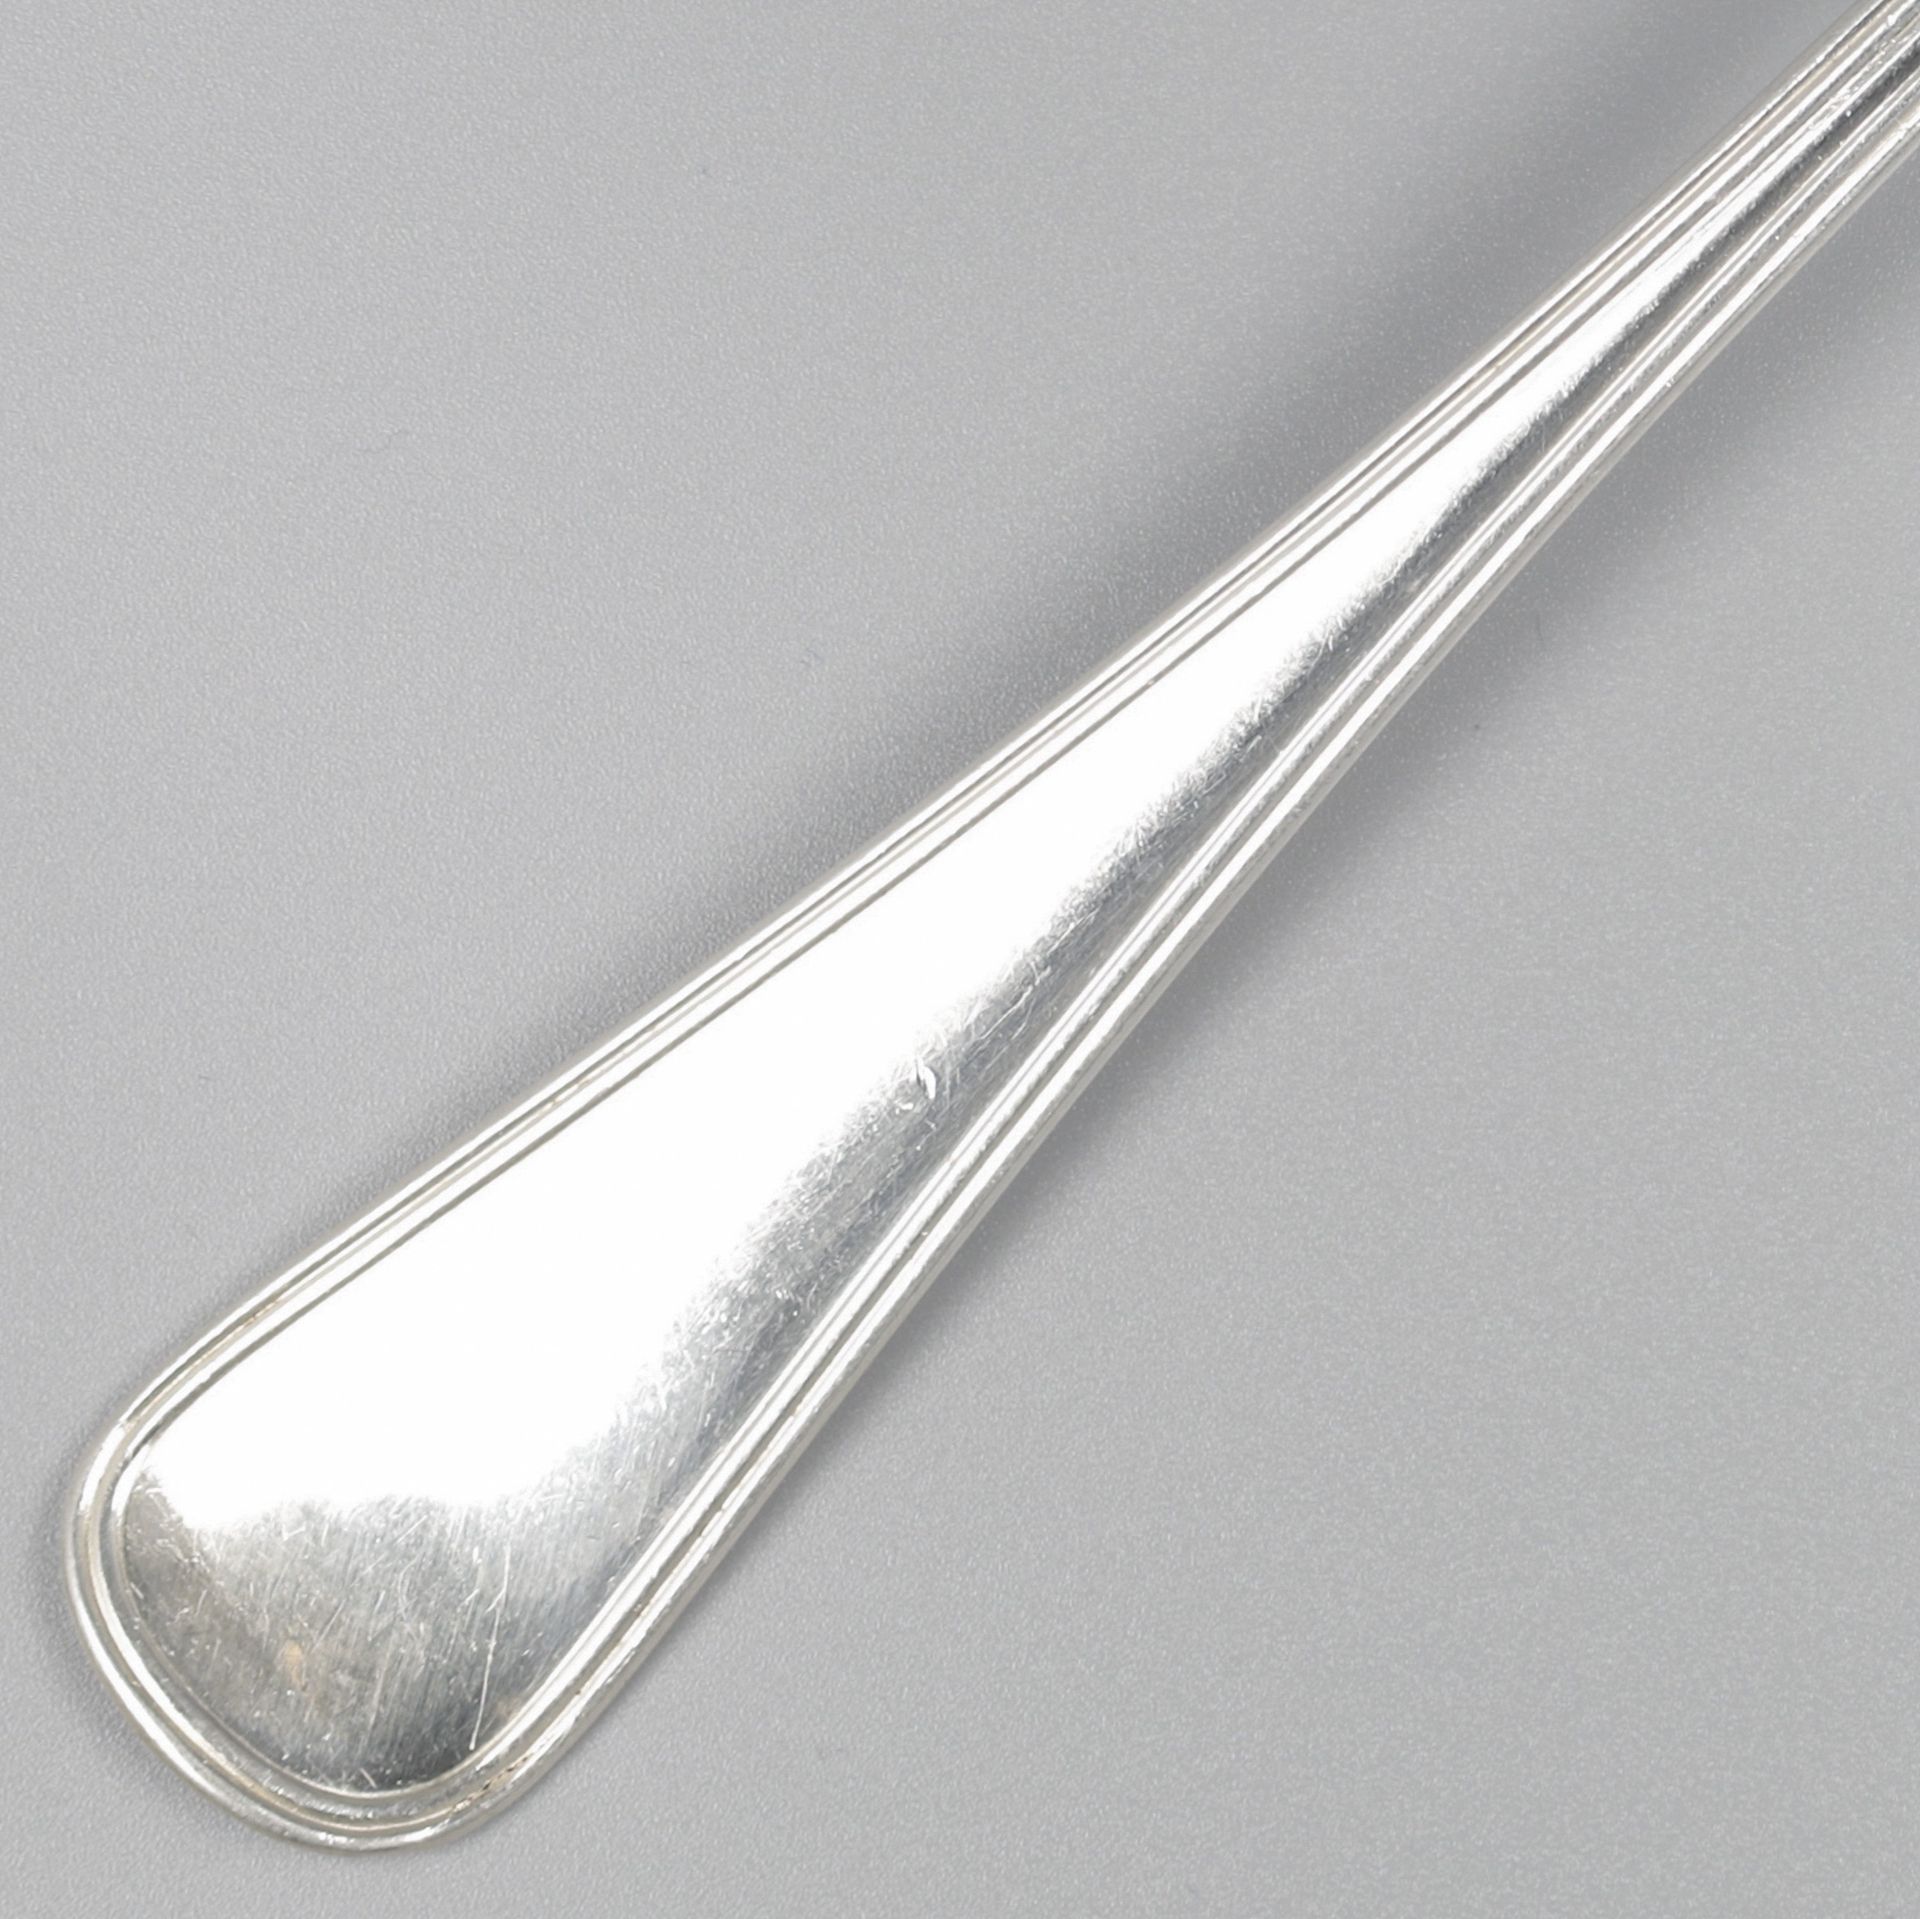 No reserve - Potato serving spoon "Hollands Rondfilet" silver. - Image 4 of 7